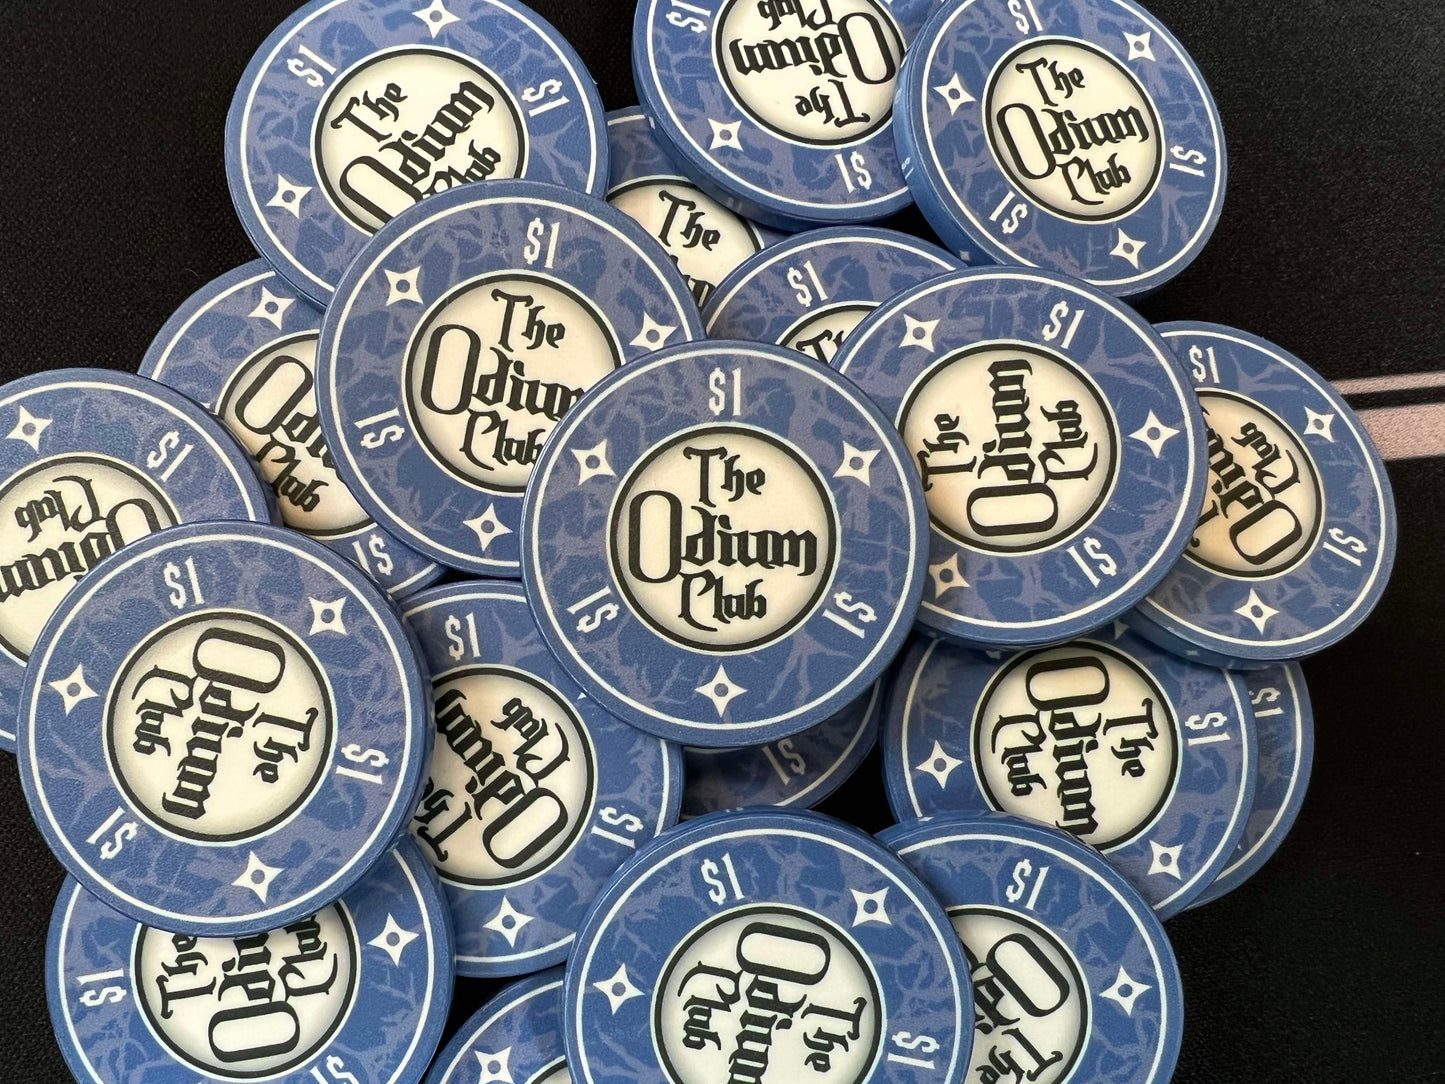 Shown here are the Odium Club 1 dollar blue poker chips in a large pot. These are 39mm chips (actually closer to 40mm), American casino size poker chips. They are the classic poker chip thickness of 3.3mm or 0.13 inches. Whether you're playing poker with family and friends and need dollar chips for low stakes games...or whether you're a professional poker player, these chips will get your texas hold'em game started off right.